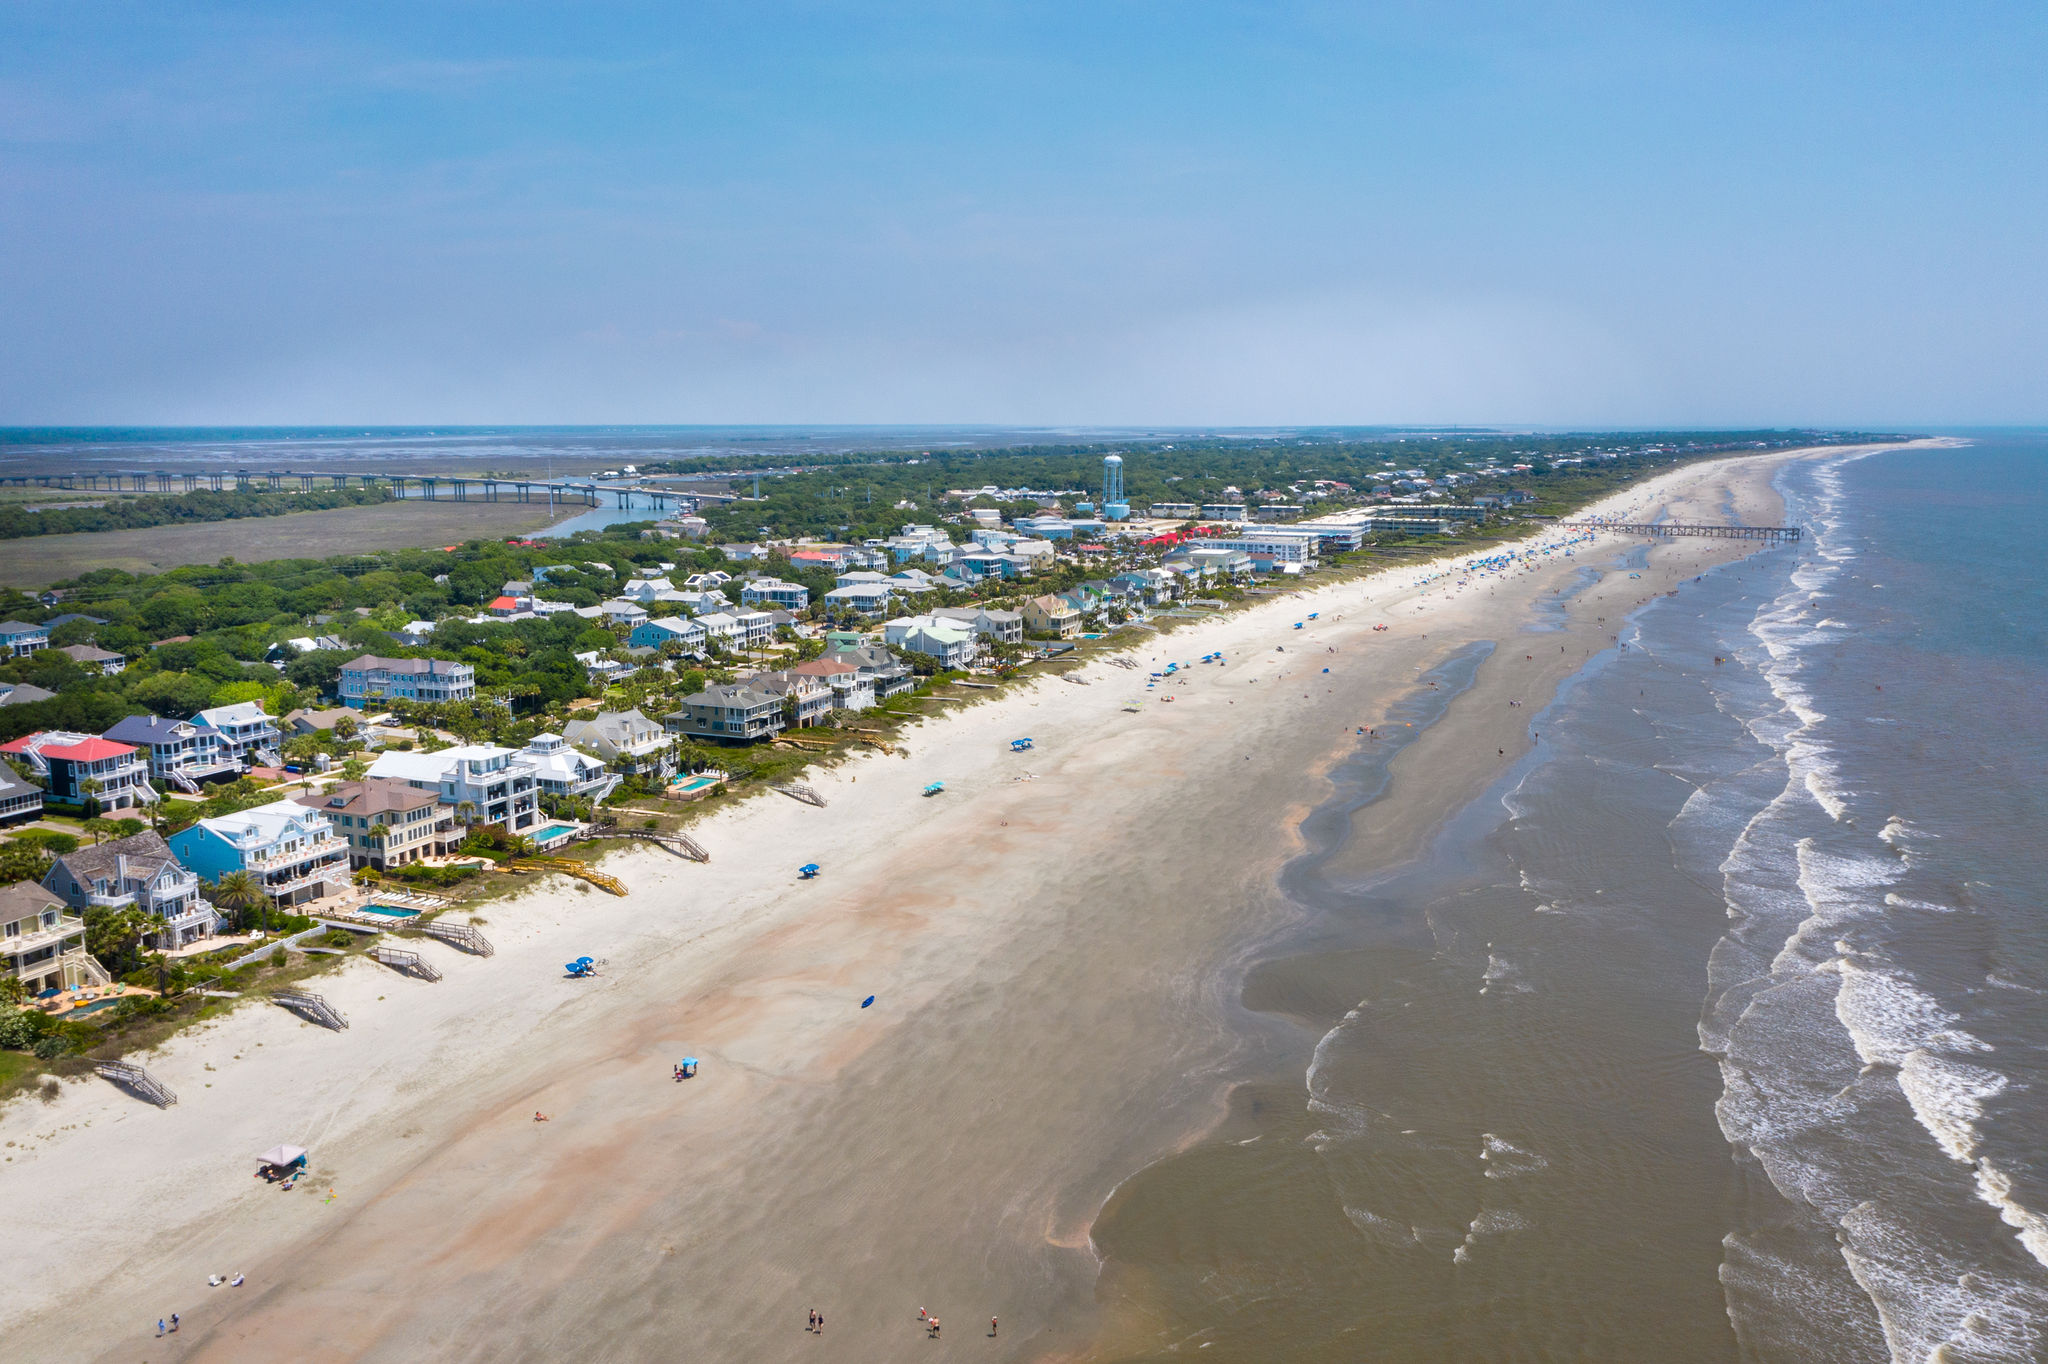 How to Plan A Fun-filled Vacation to Isle of Palms SC